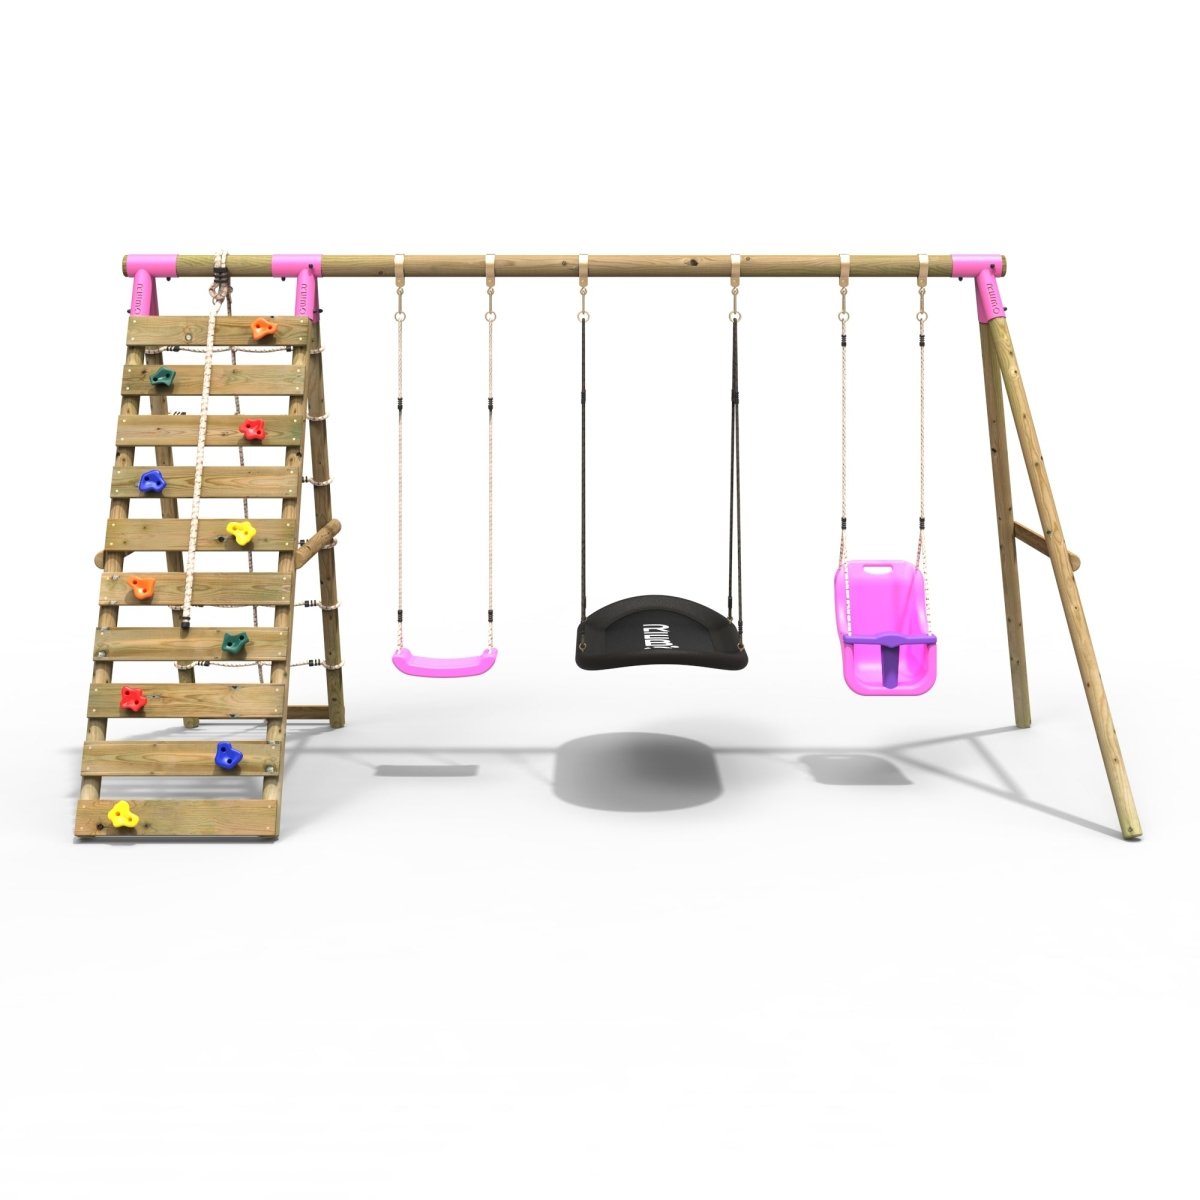 Rebo Wooden Swing Set with Up and Over Climbing Wall - Skye Pink